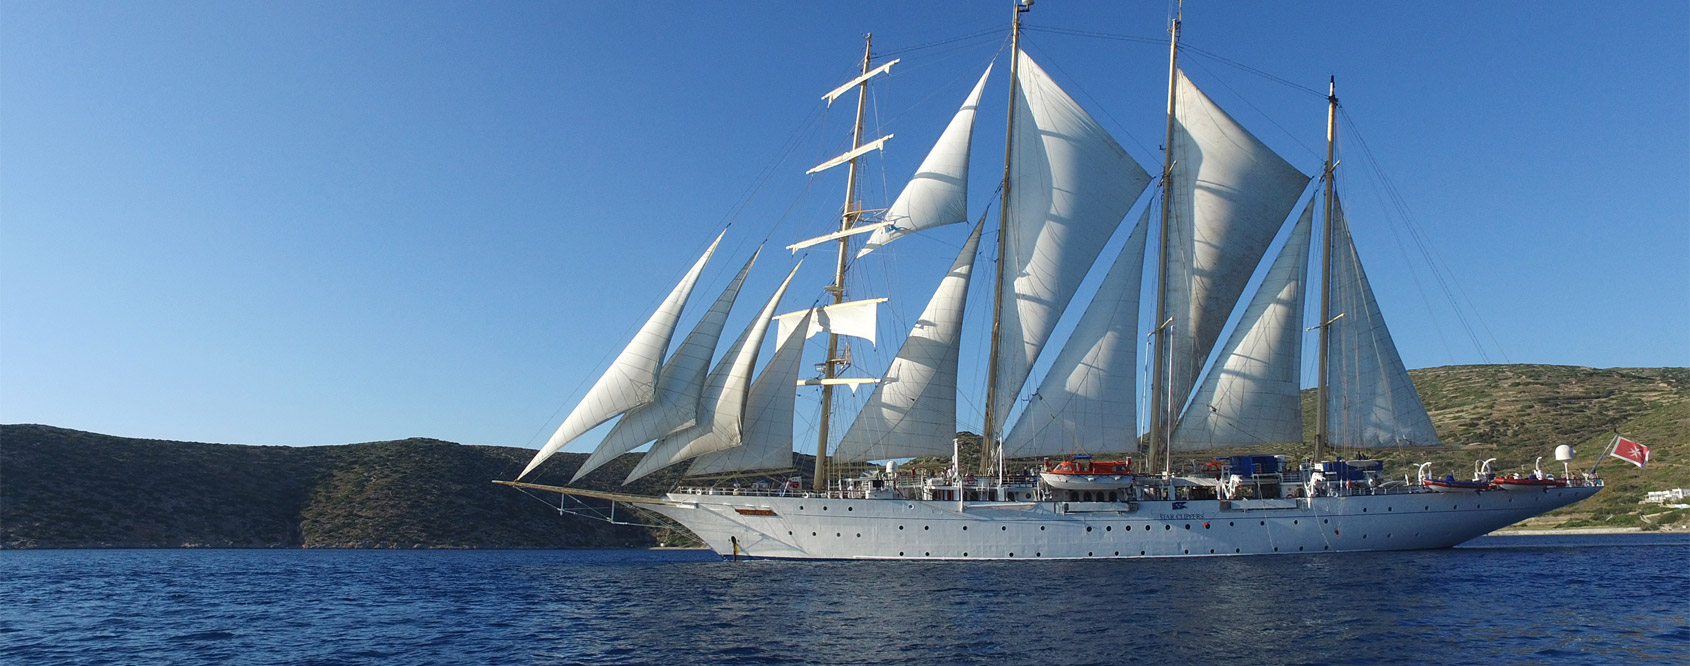 Star Clippers Main Image